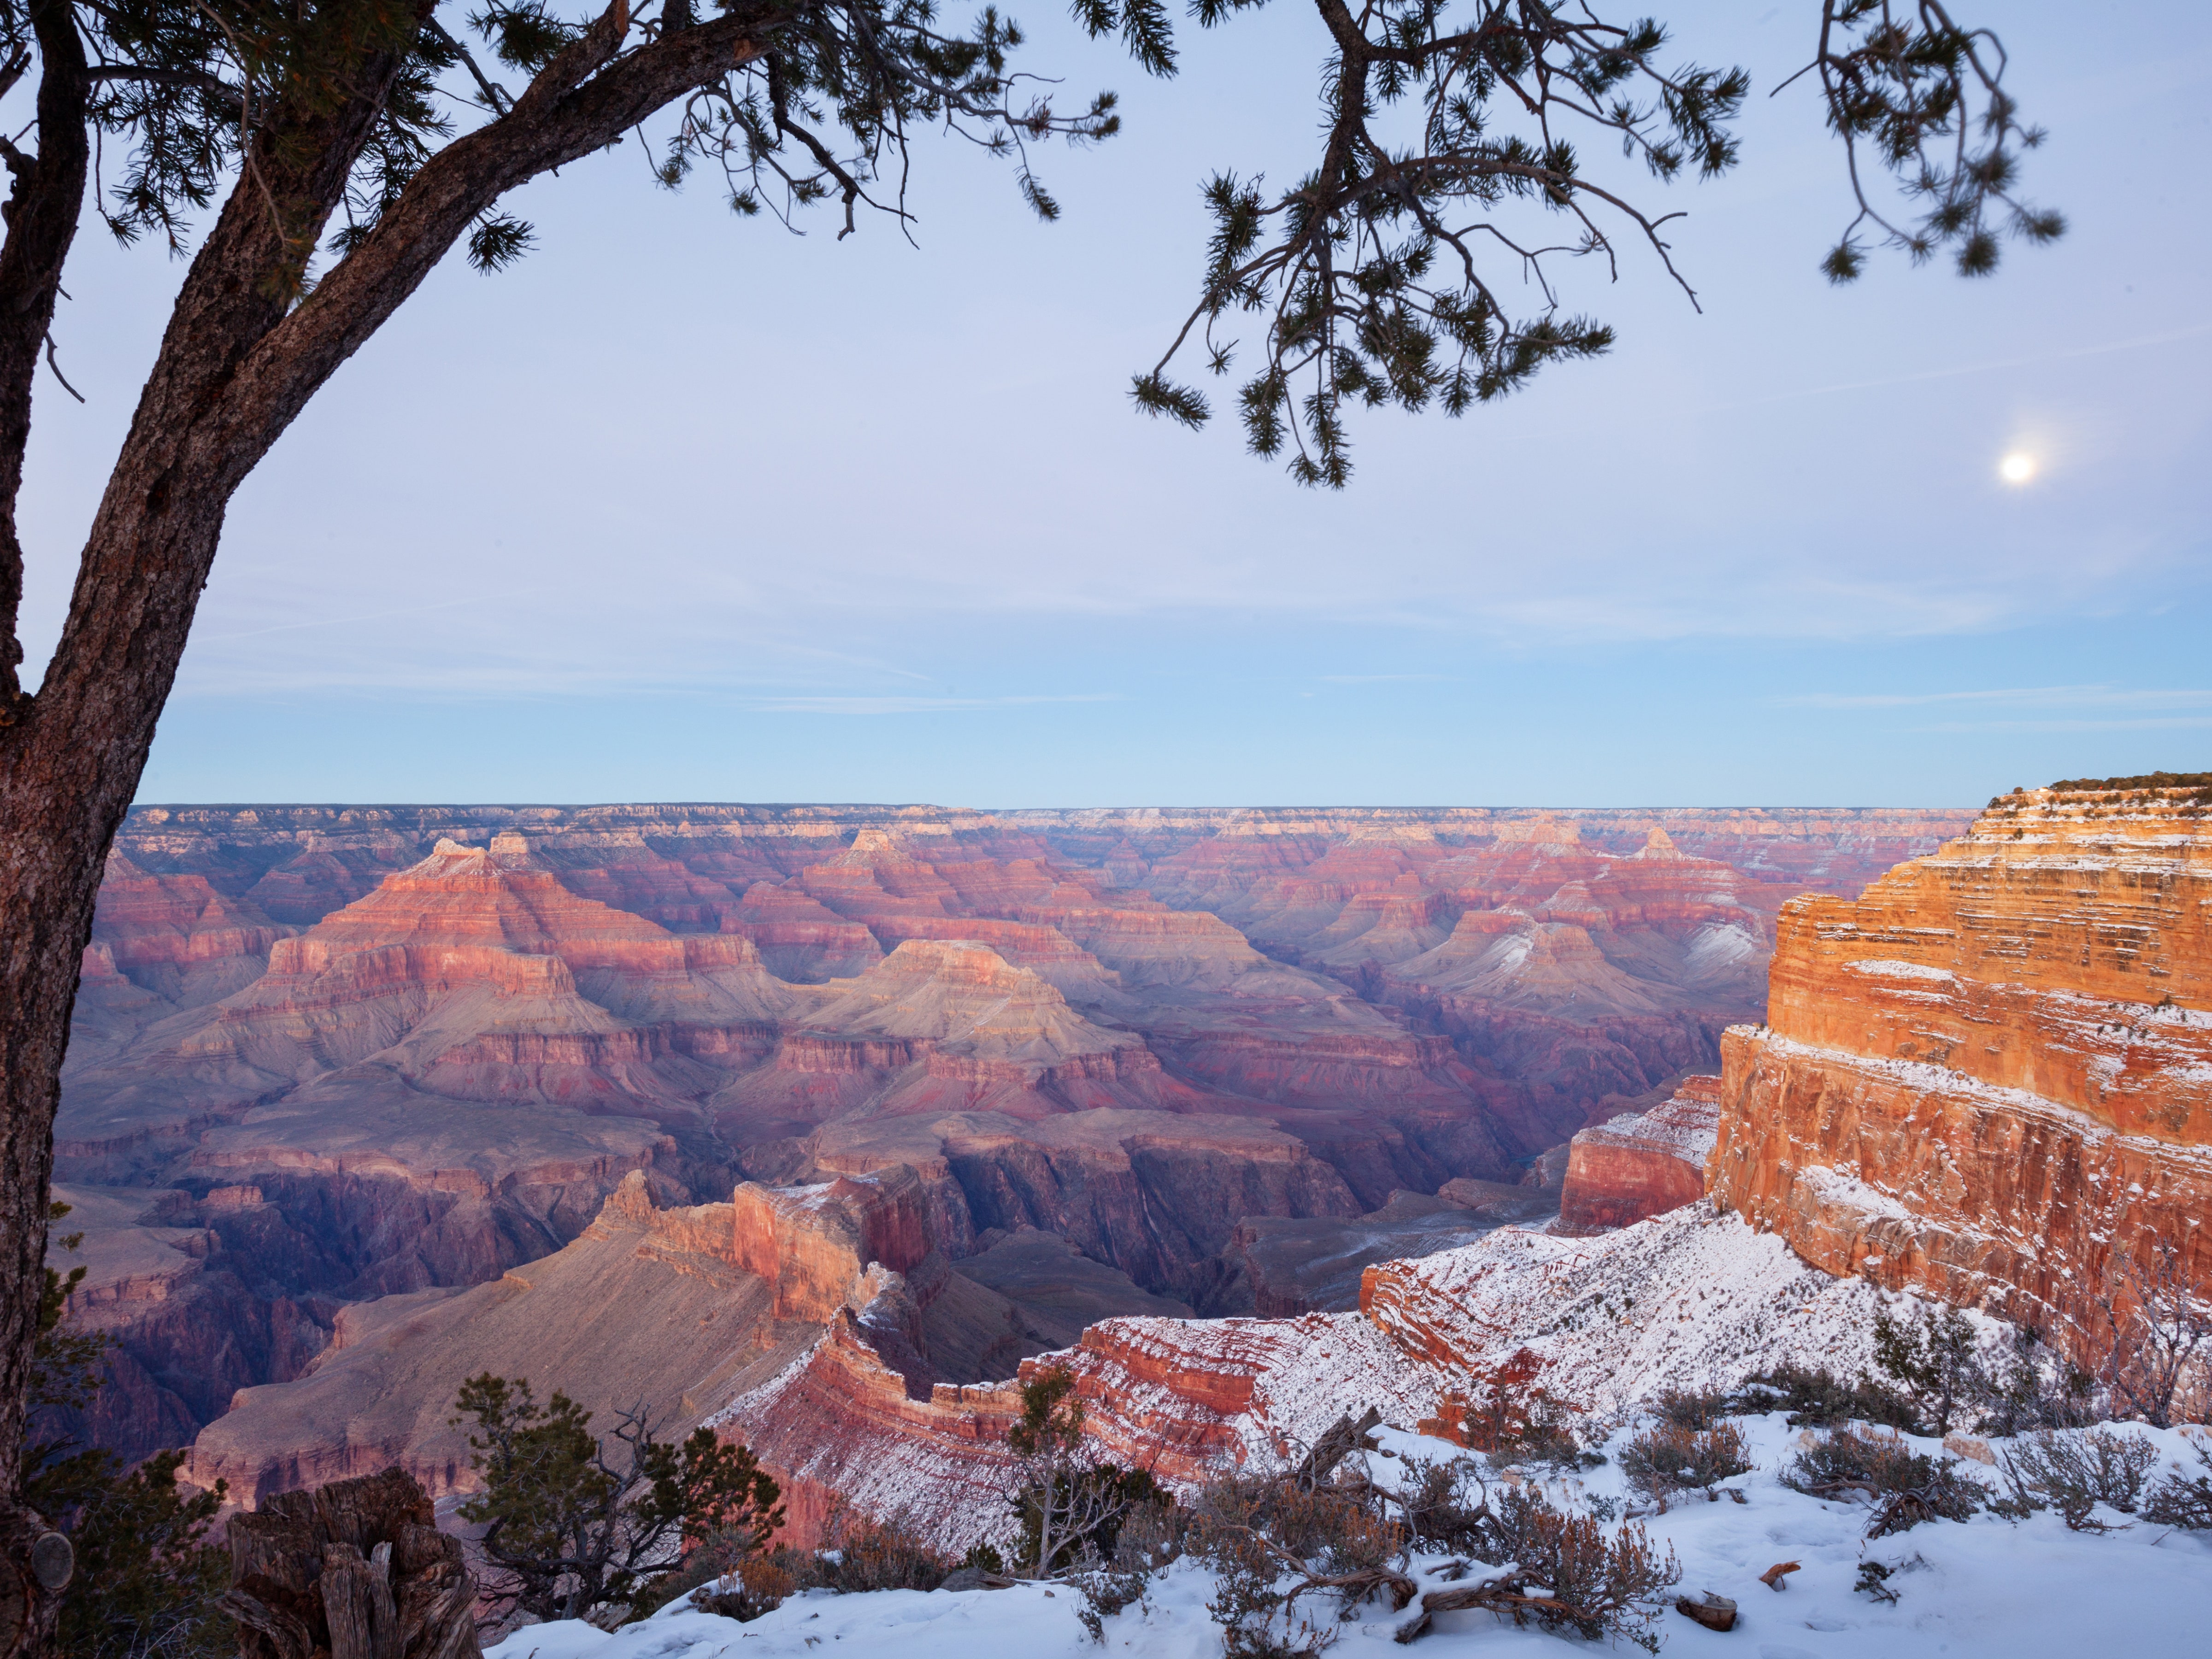 National Parks That Are Even Better in Winter. Condé Nast Traveler